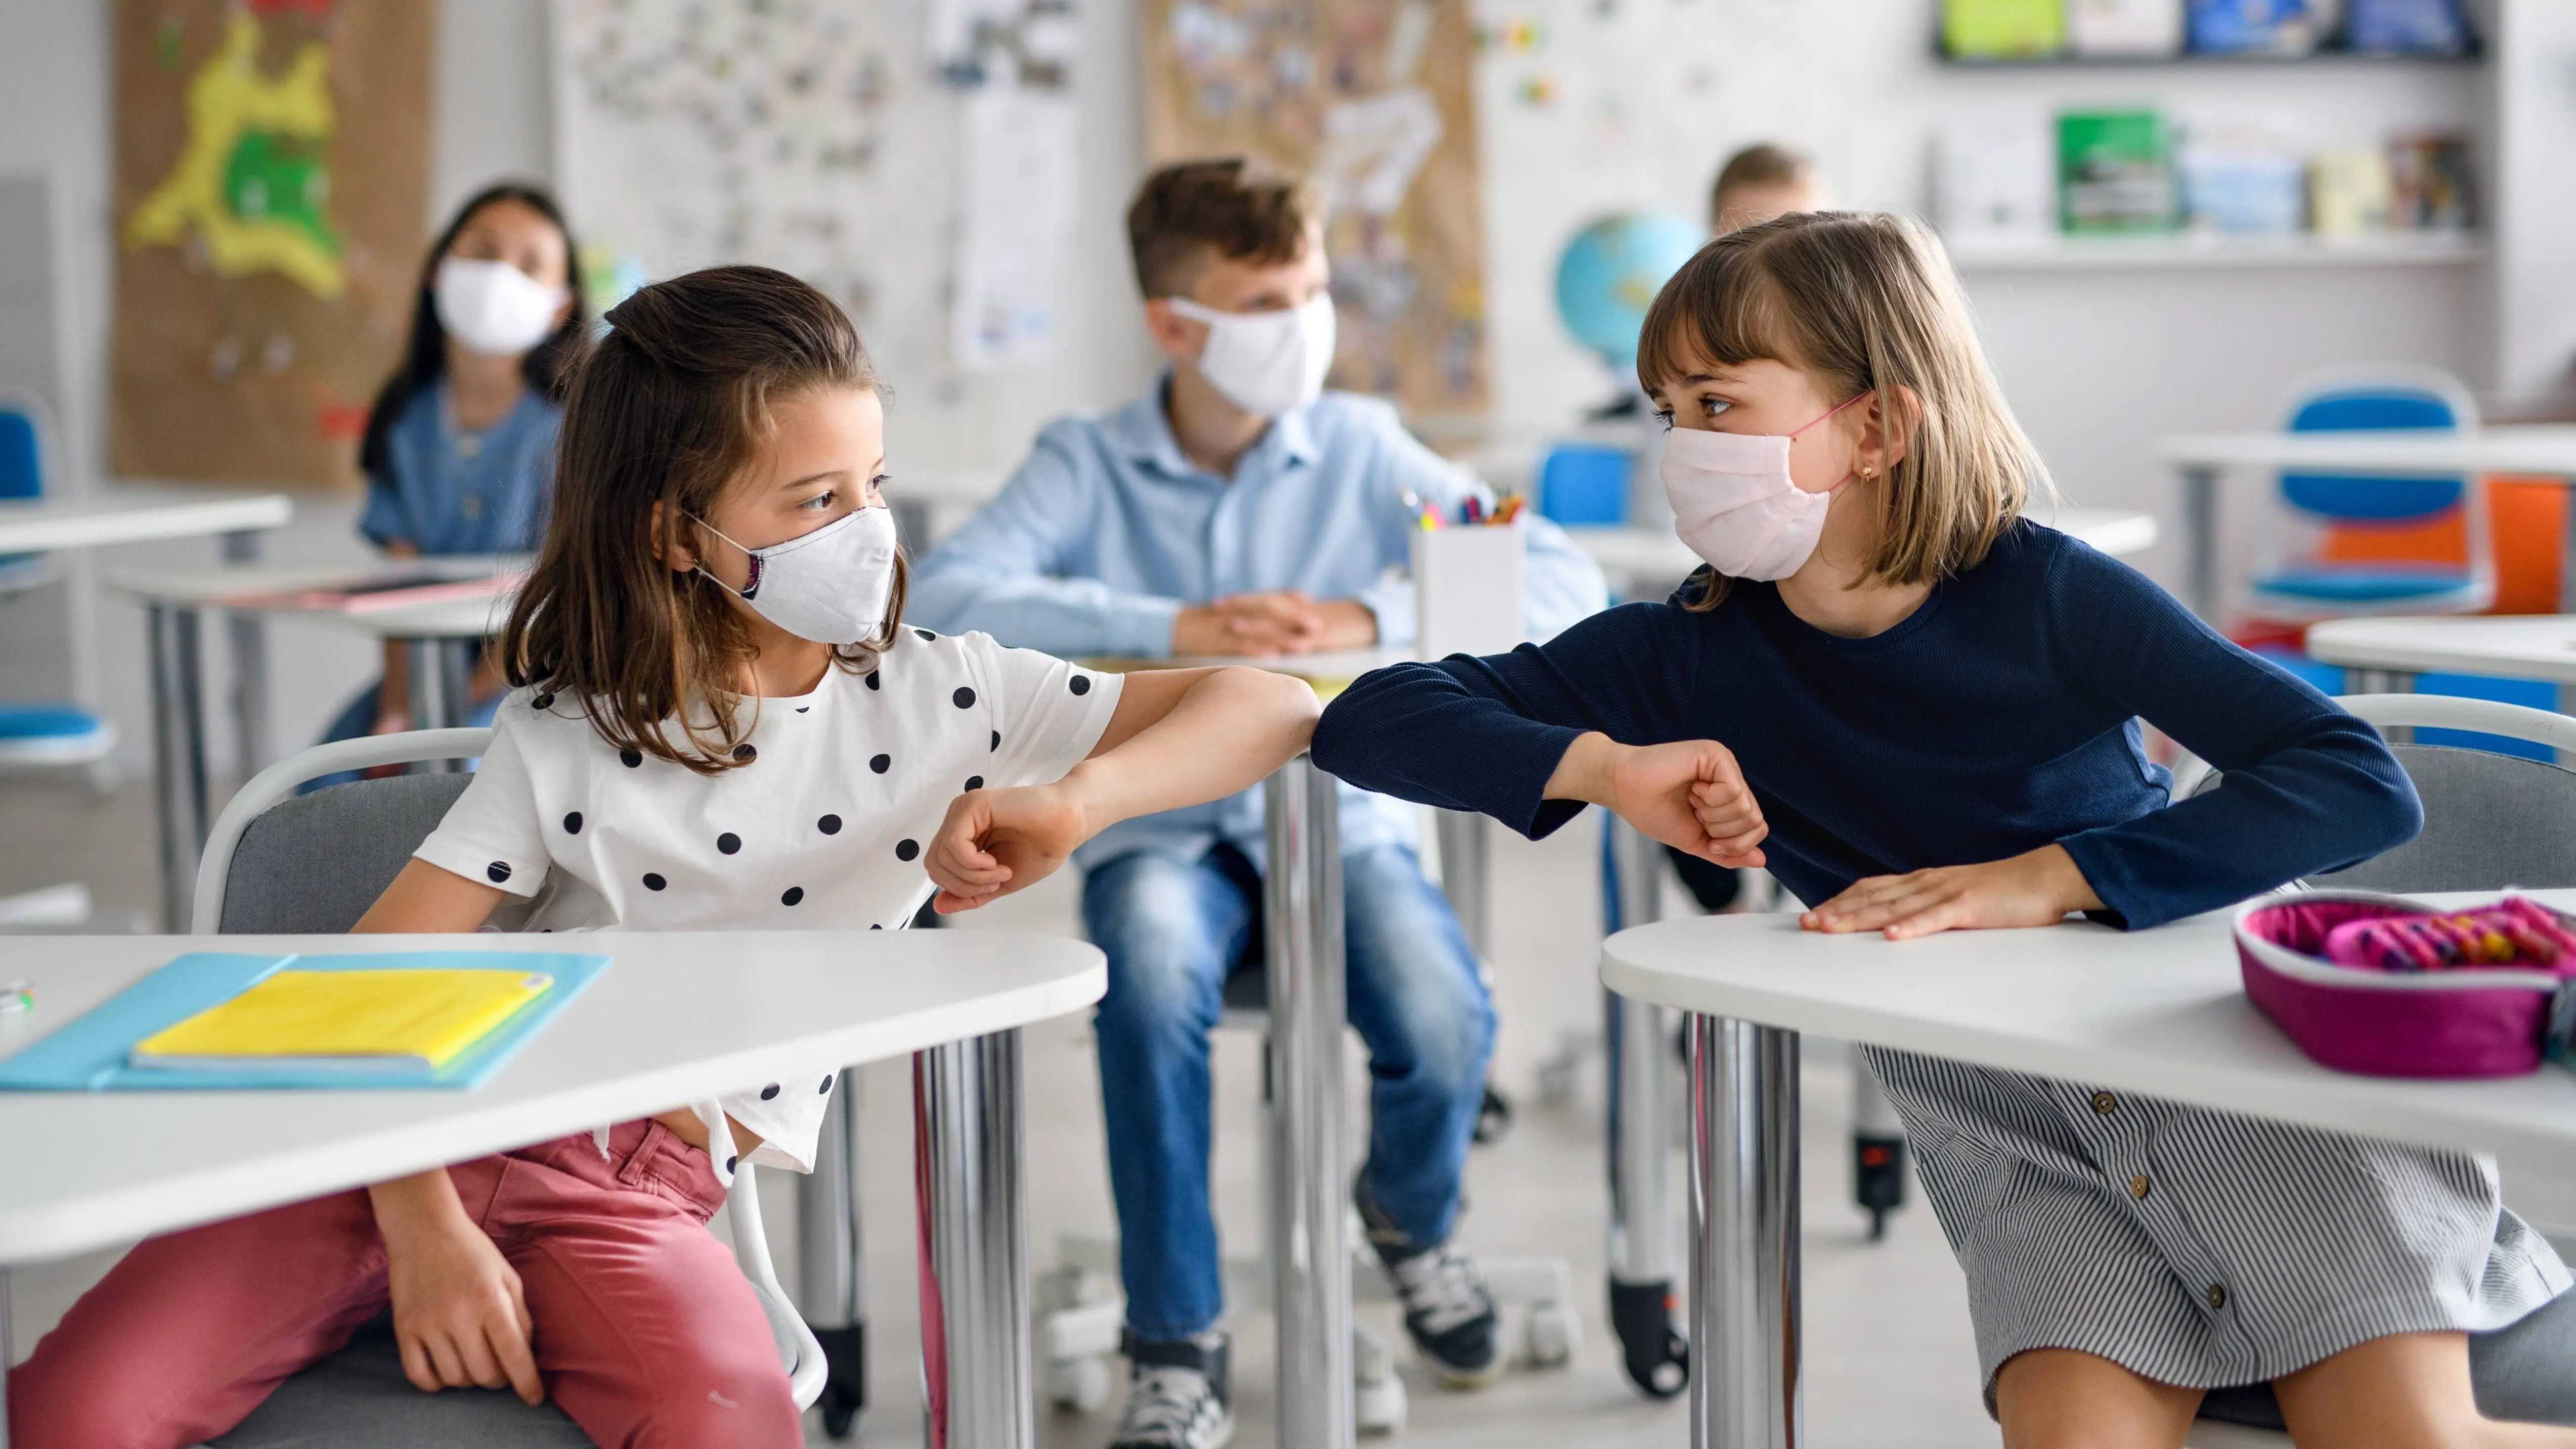 a-classroom-of-elementary-or-middle-school-aged-children-wearing-masks-and-praticing-social-distancing-touching-elbows-16x9-1.webp